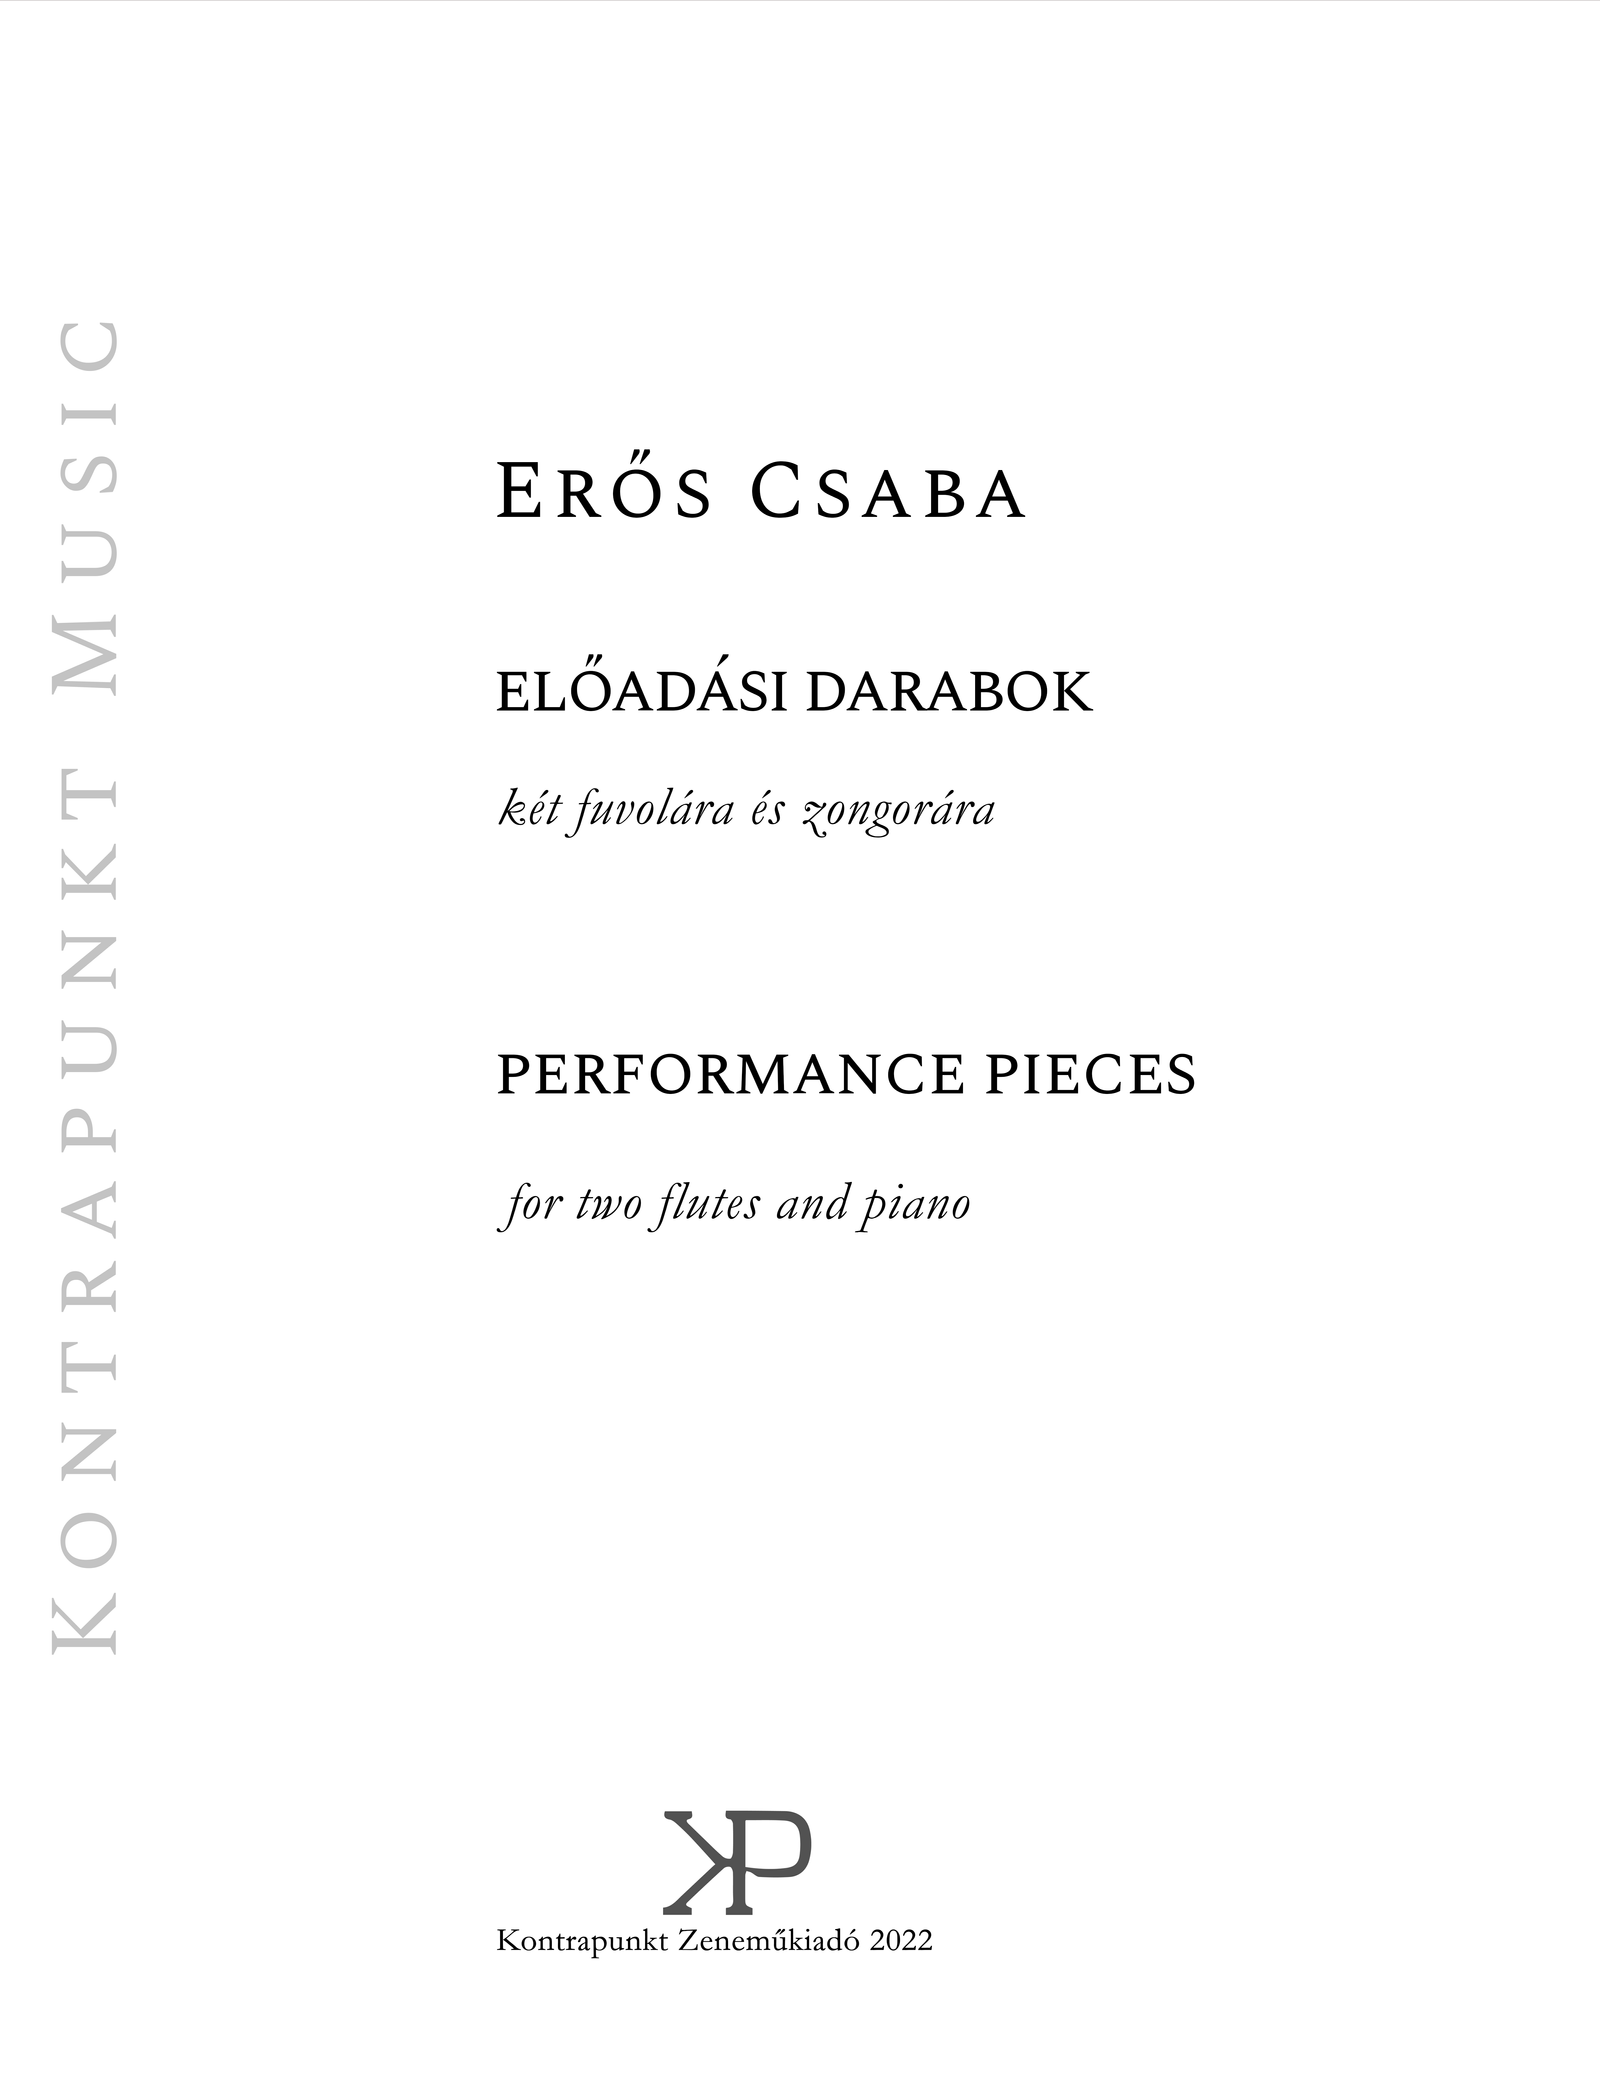 Csaba Erős: Performance pieces for two flutes and piano